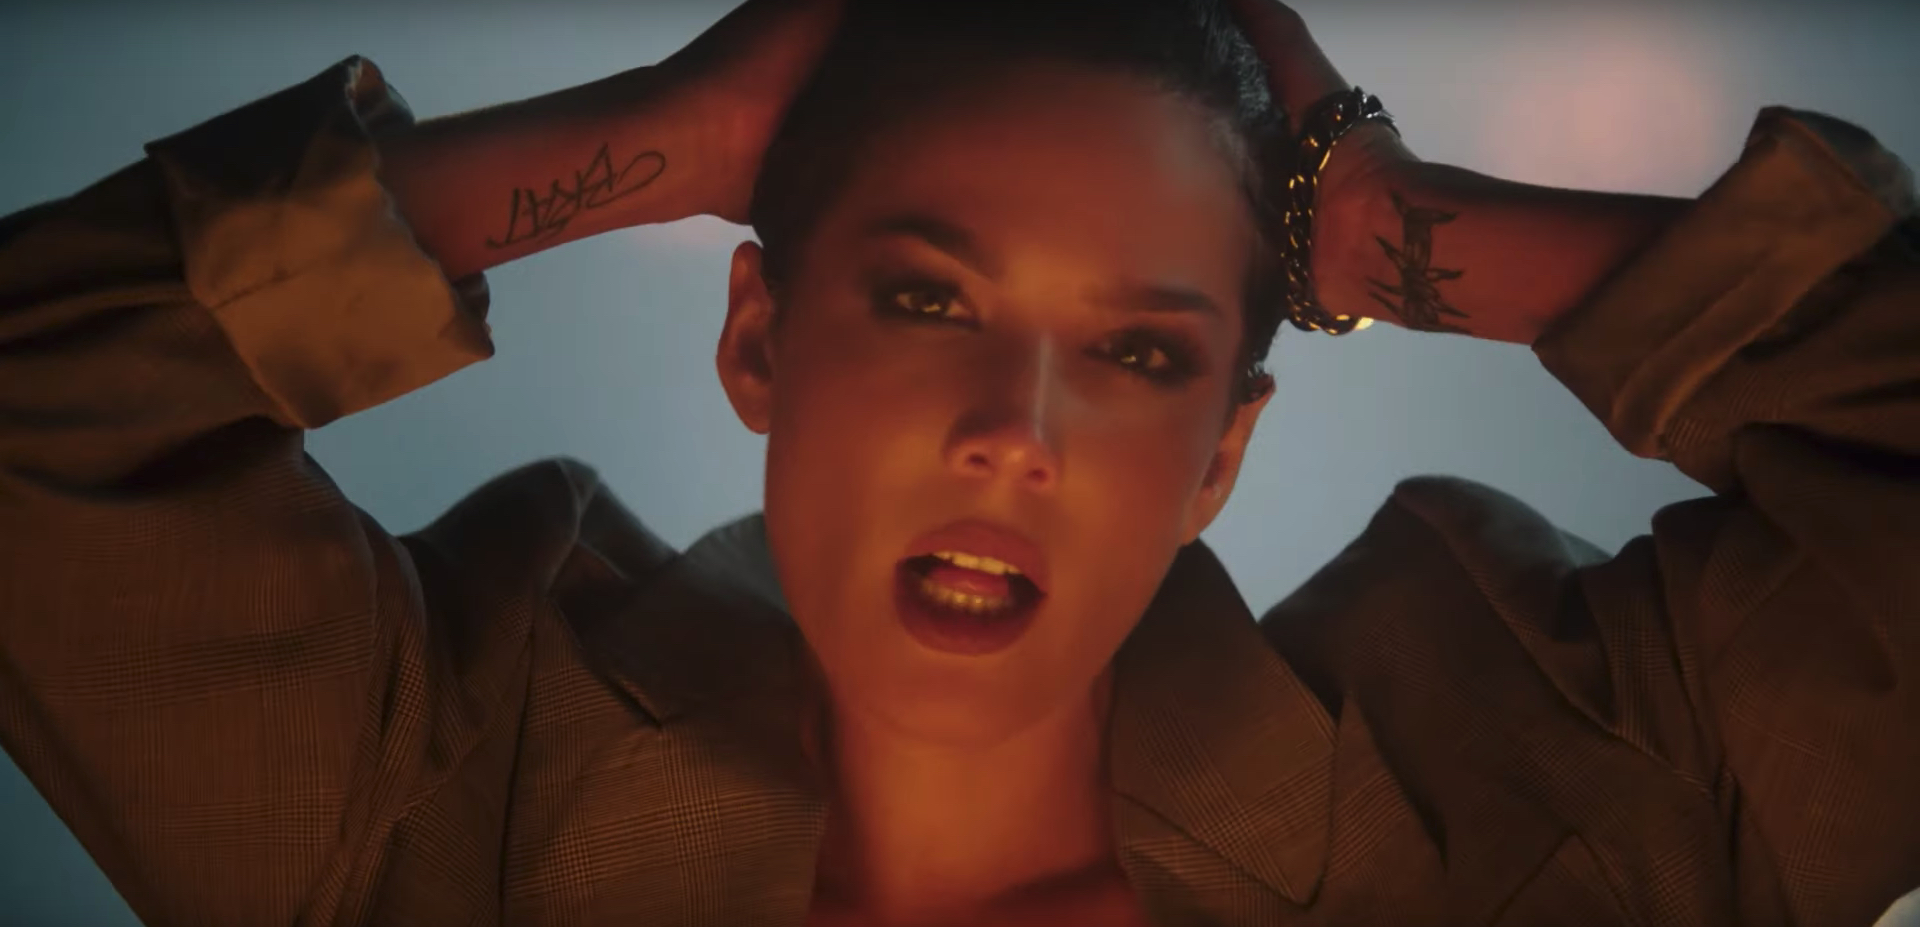 Halsey releases video for new song Nightmare, featuring Cara Delevingne1920 x 927